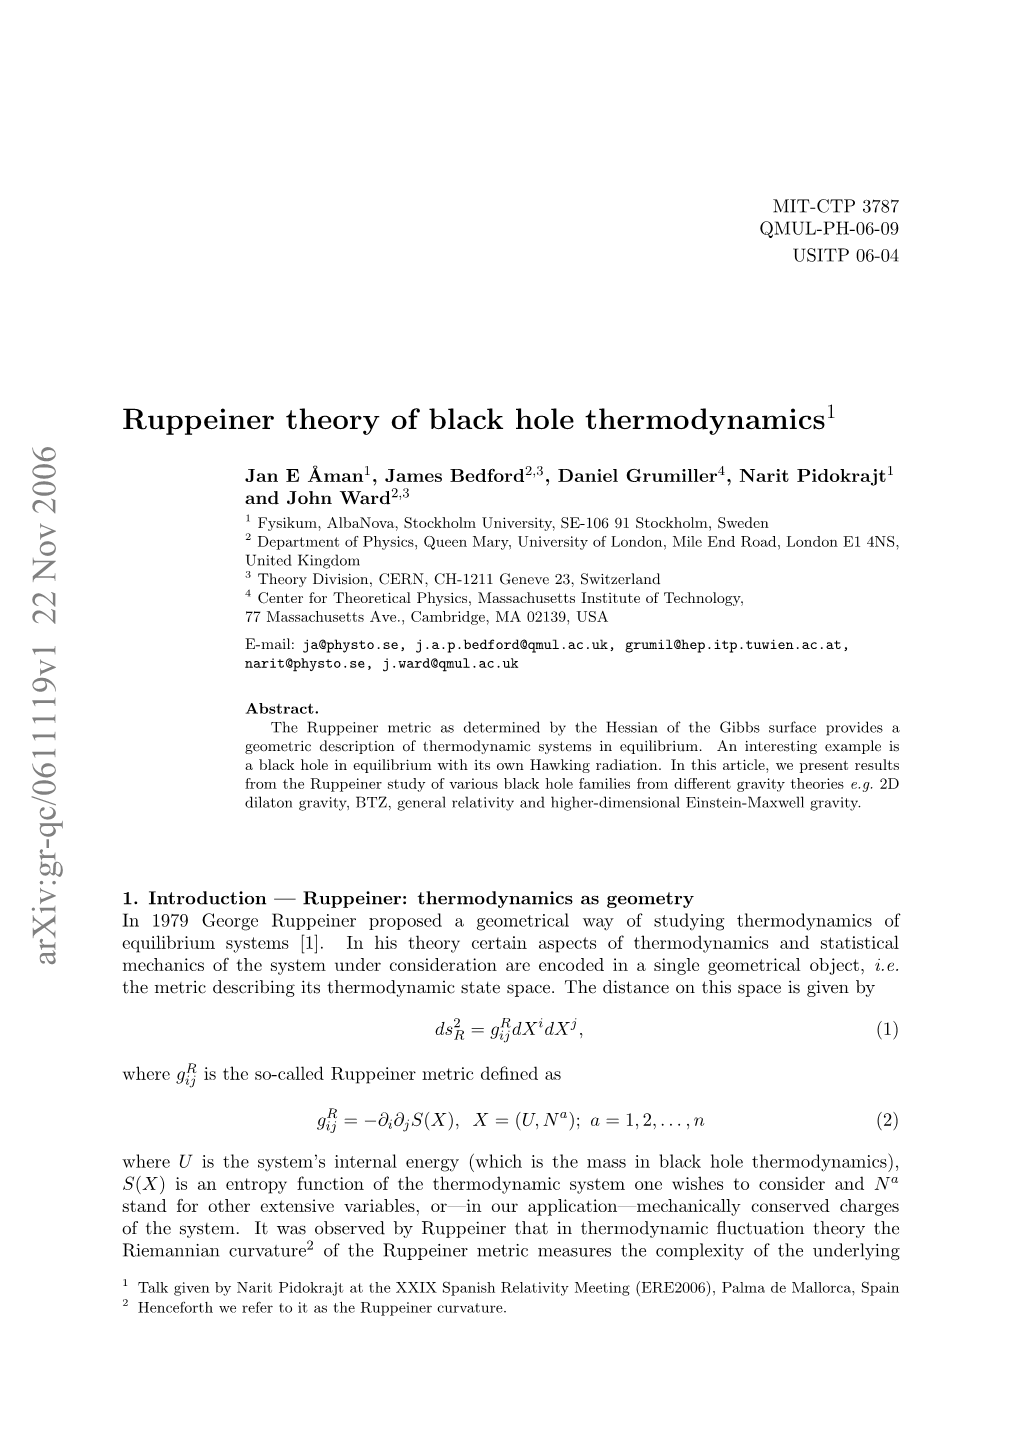 Ruppeiner Theory of Black Hole Thermodynamics